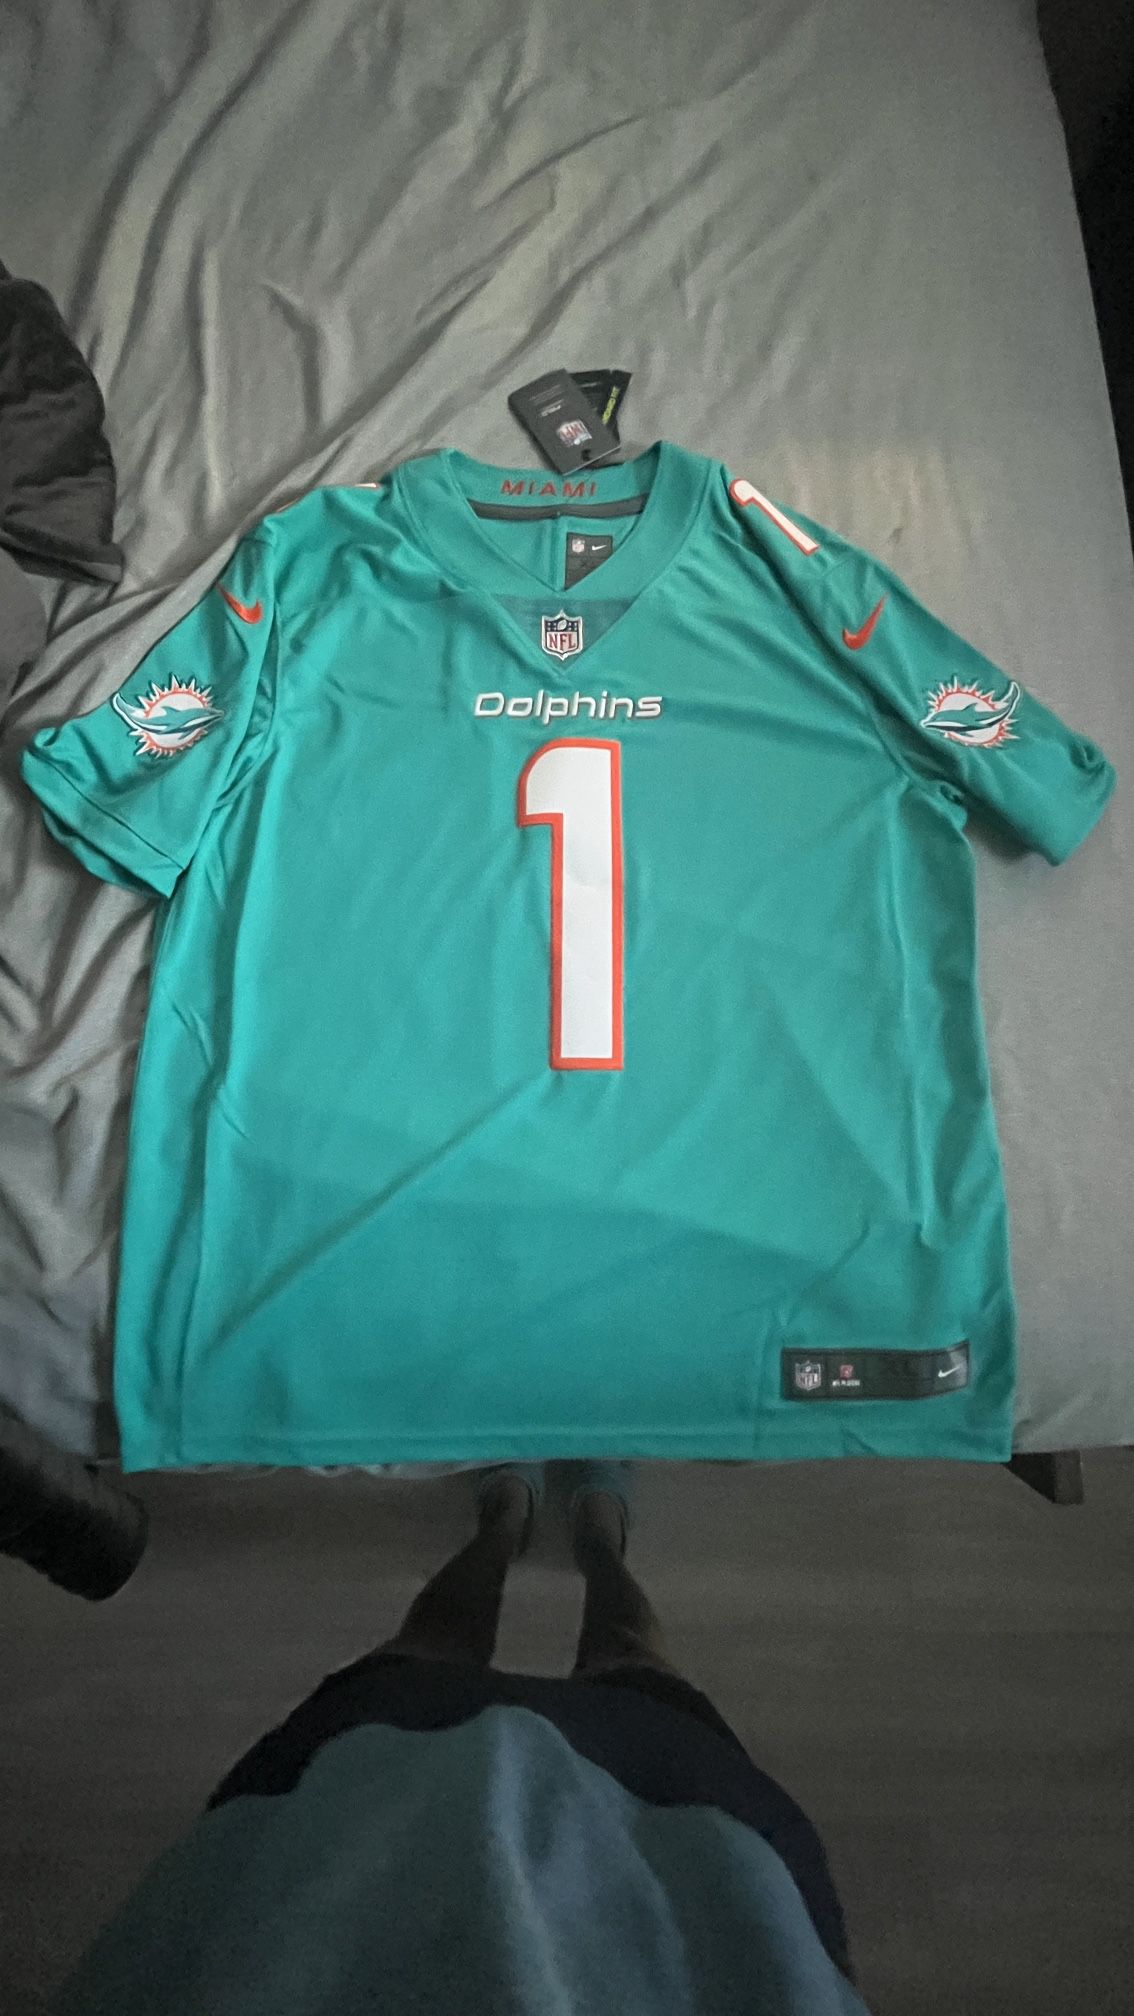 New Dolphins Jersey